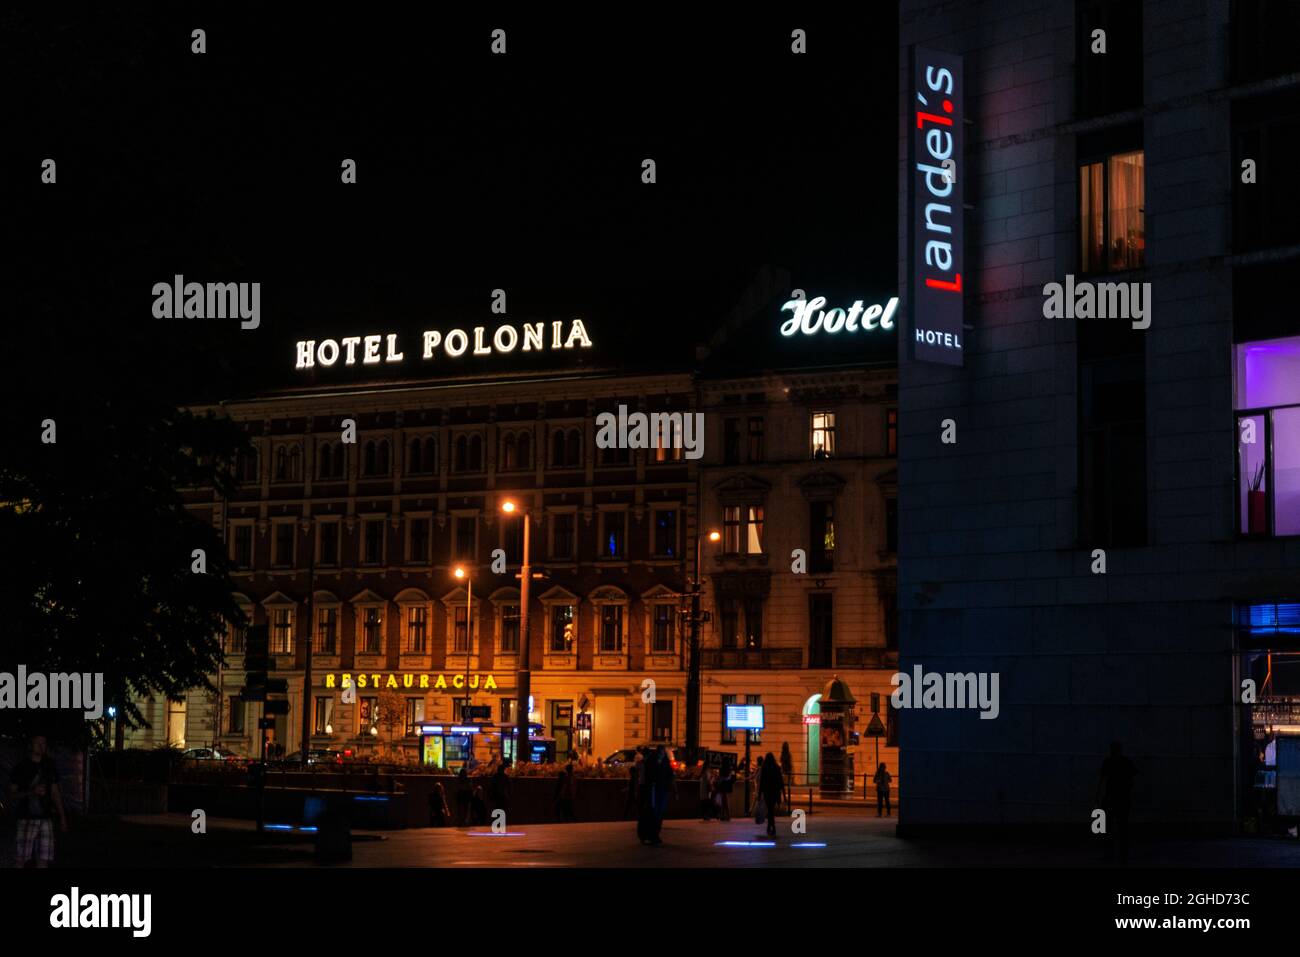 Krakow, Poland - August 30, 2018: Facade of the Polonia Hotel and the Landels hotel at night in Krakow, Poland Stock Photo